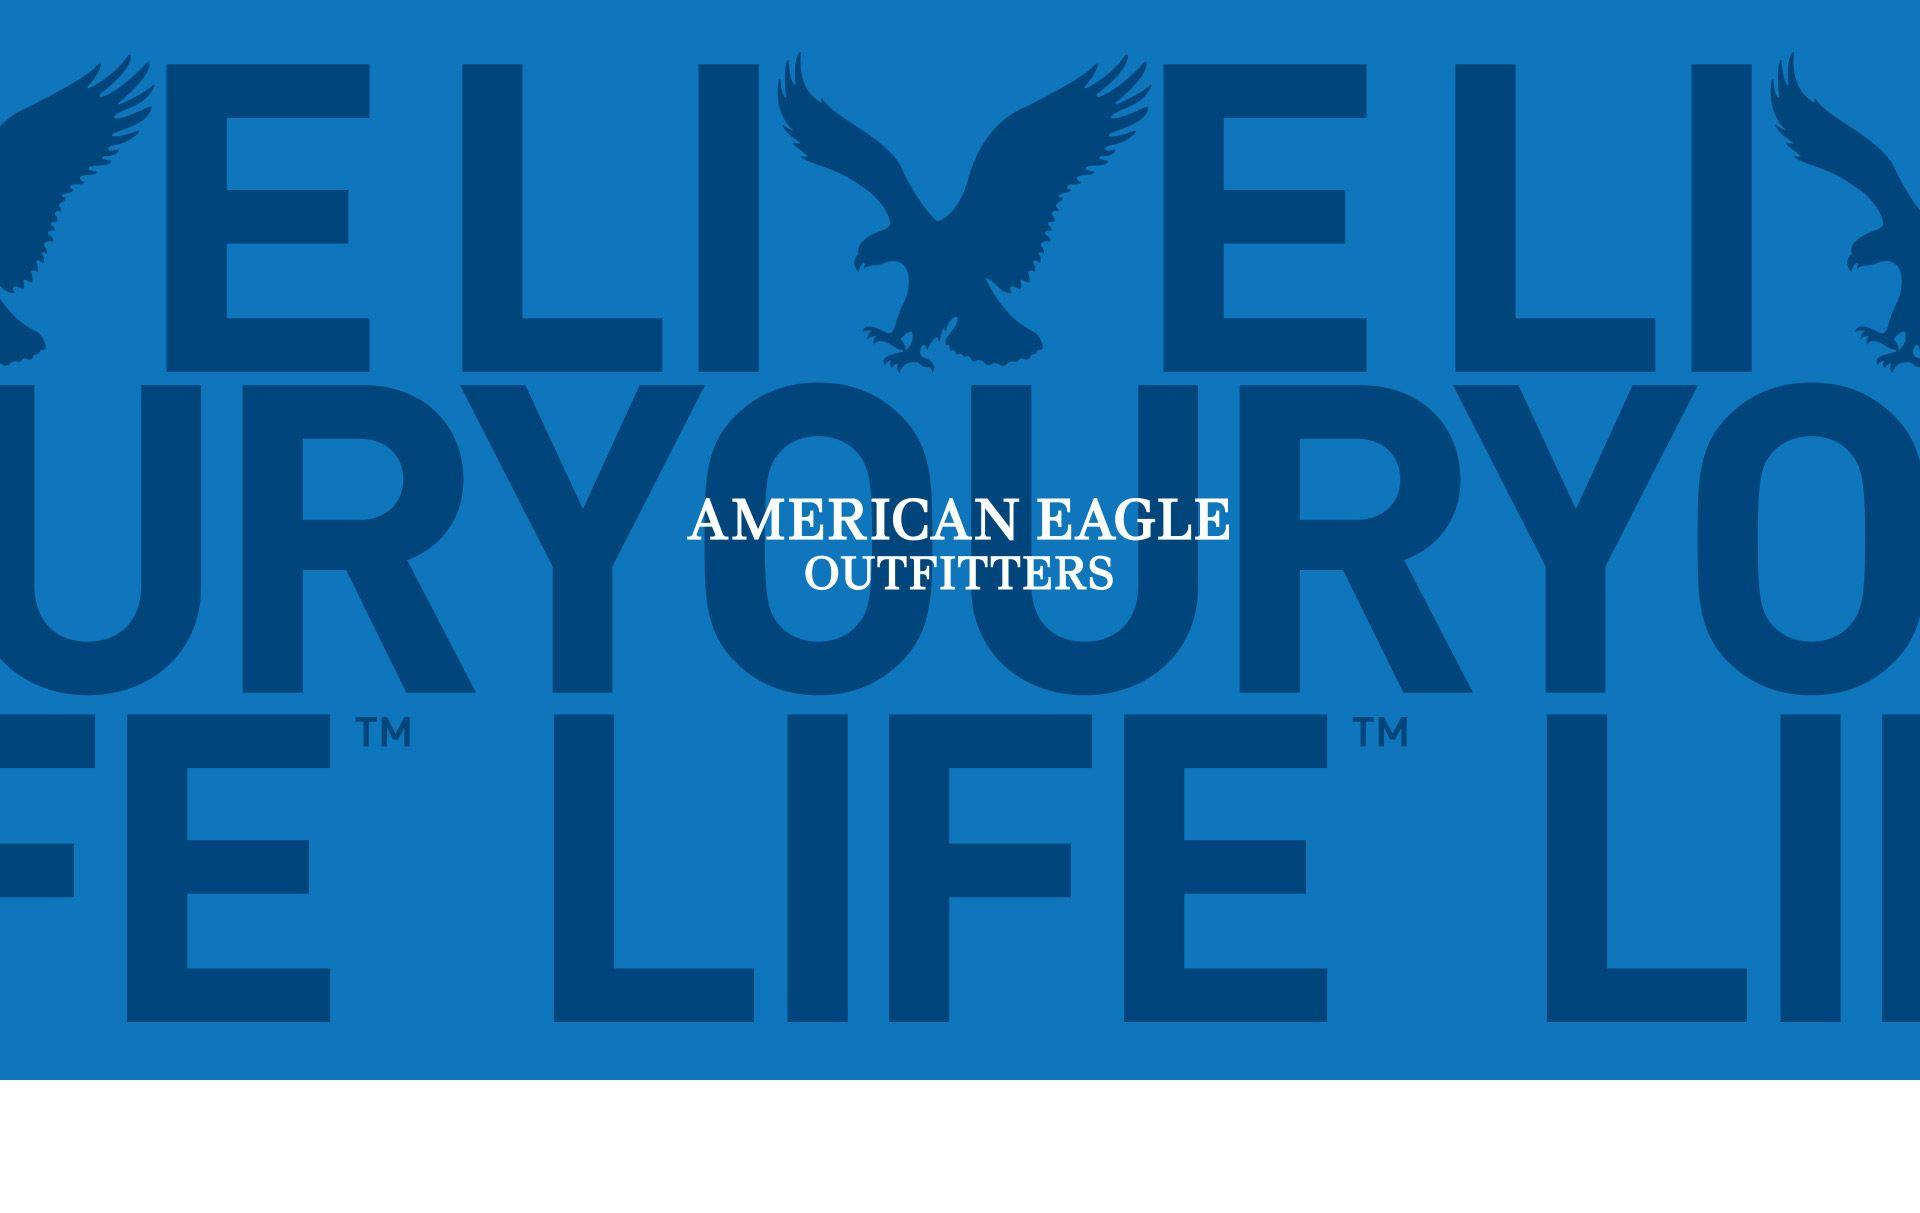 American Eagle Outfitters Collateral